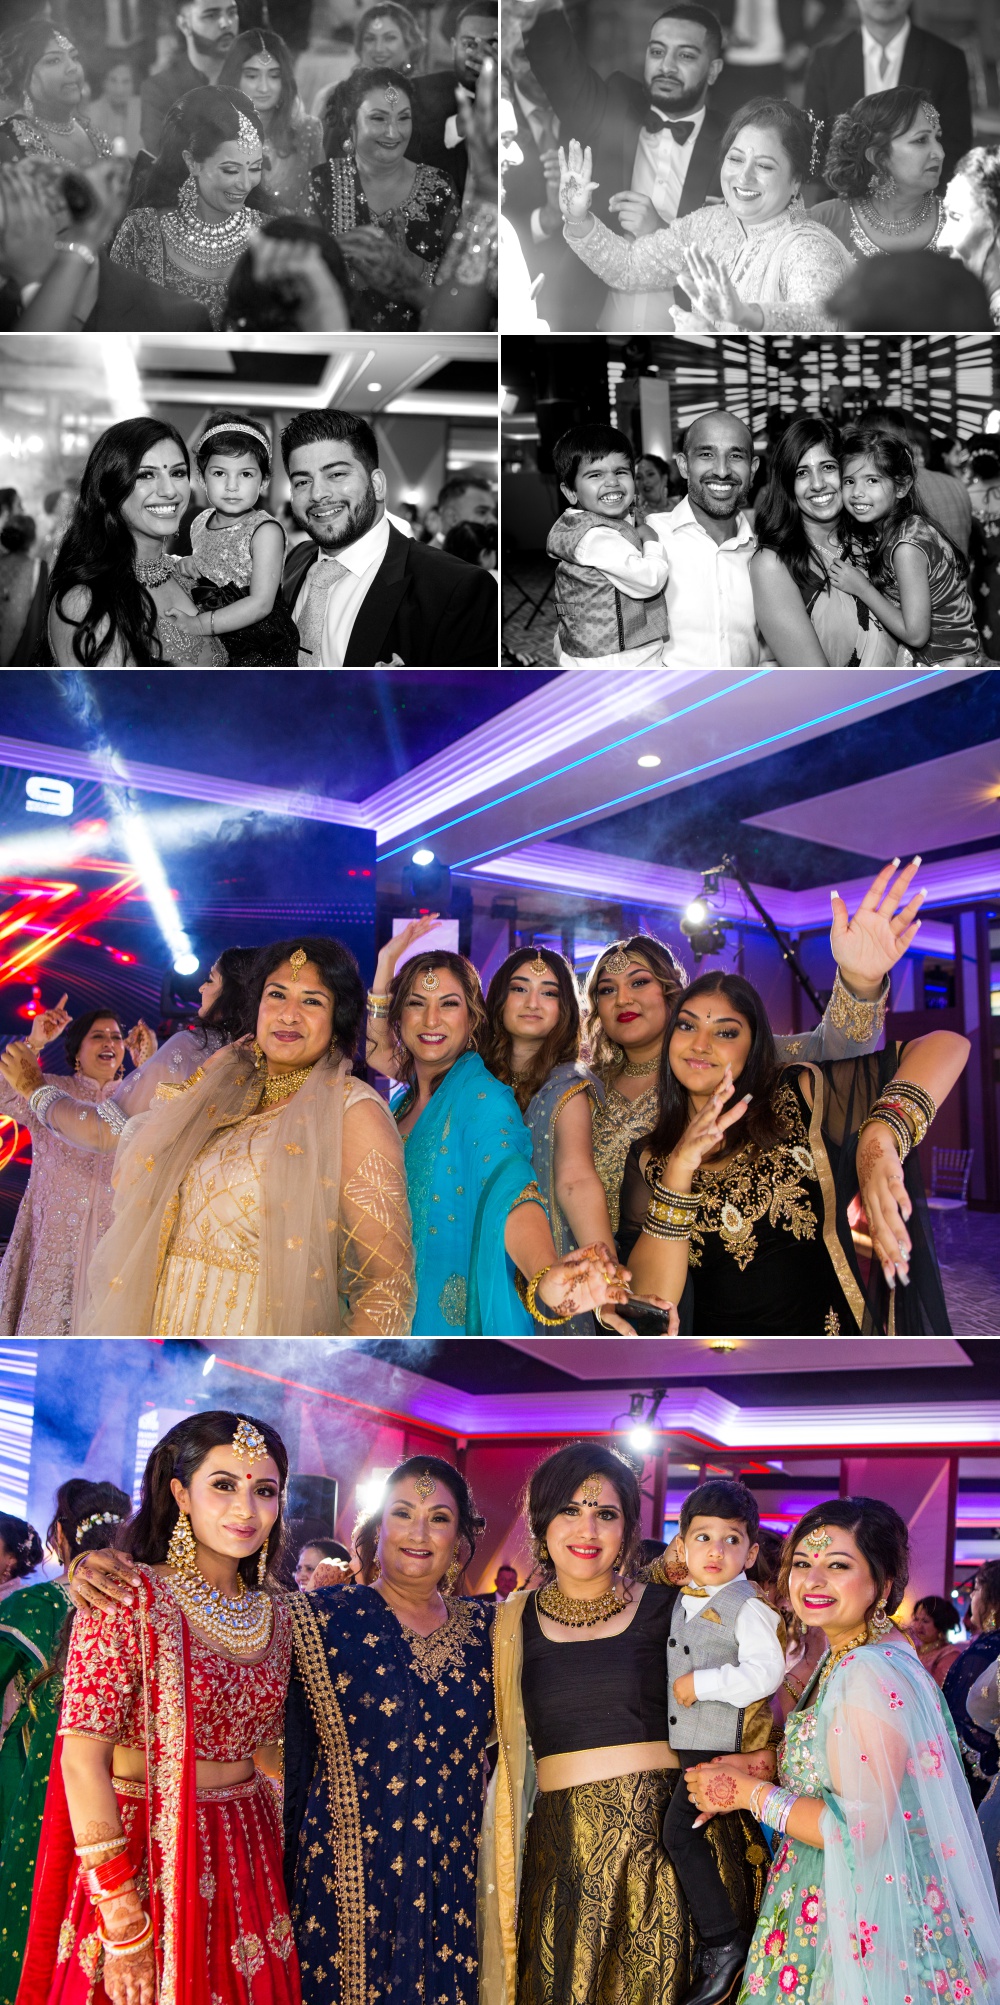 Rose Garden Banqueting Suite Asian Reception Party 10